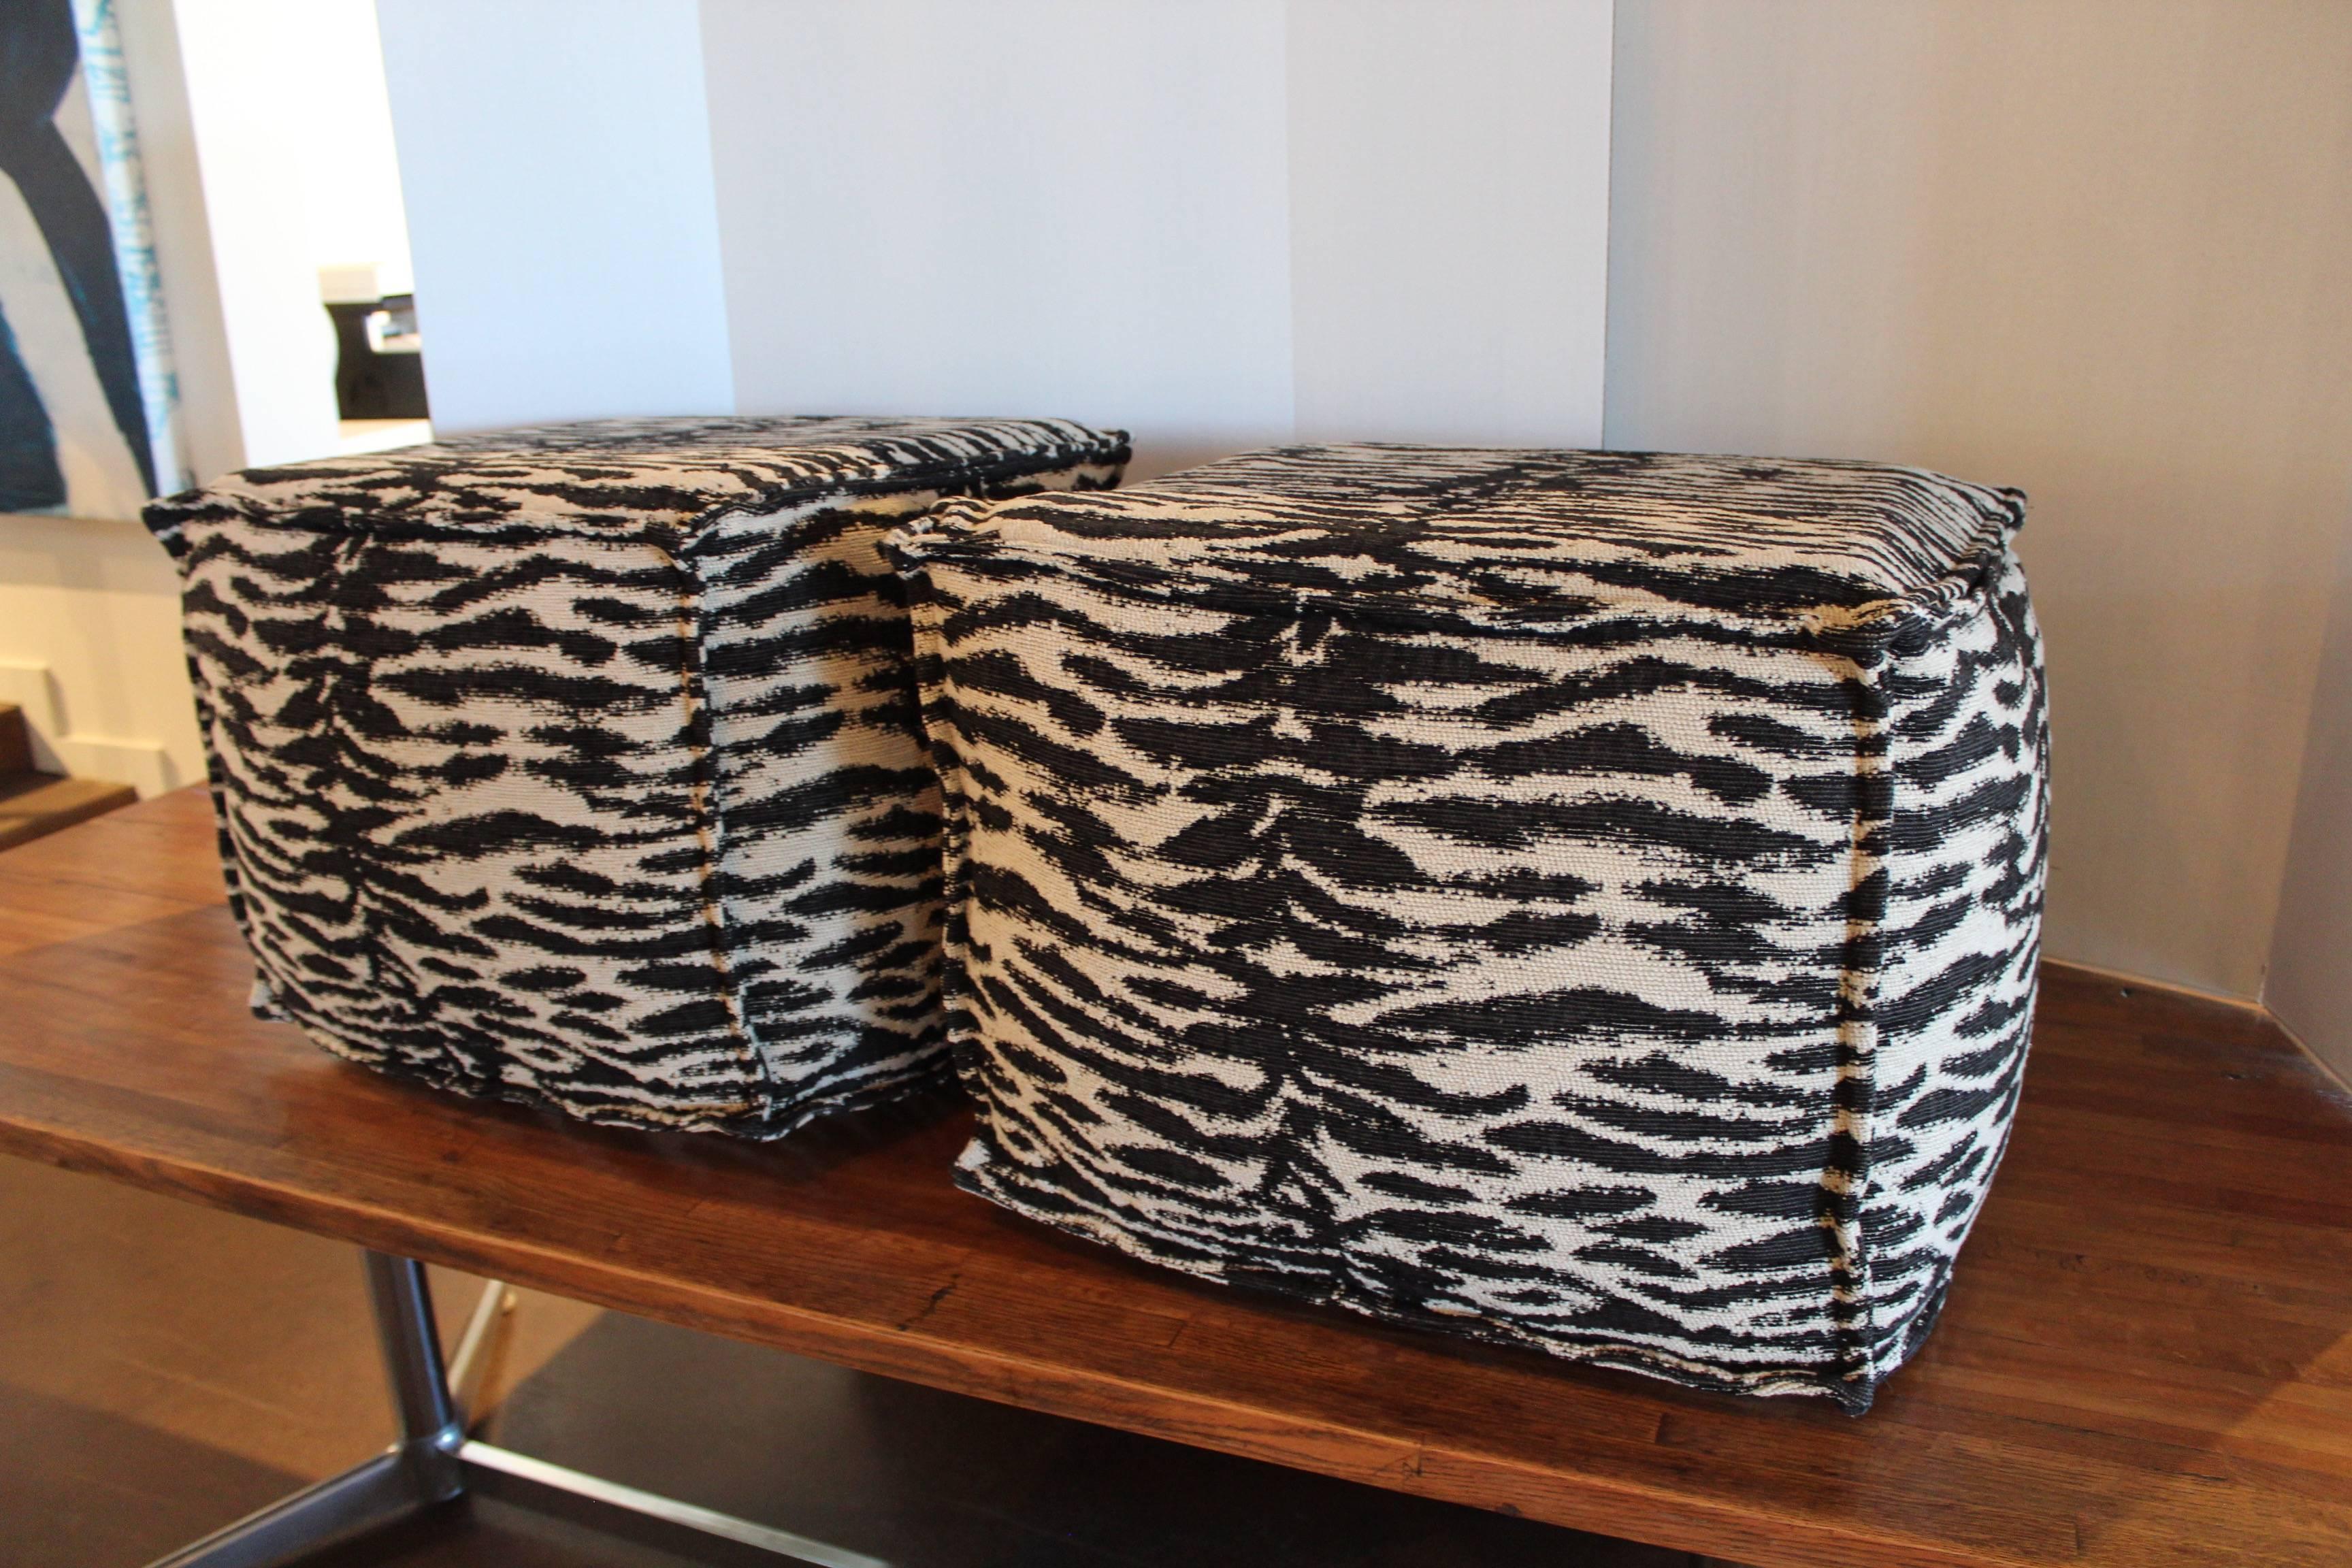 Zebra print ottomans.
Brand: Lee.
Fabric: Botswana Onyx.
Upholstery flanged.

Each ottoman is sold separately.